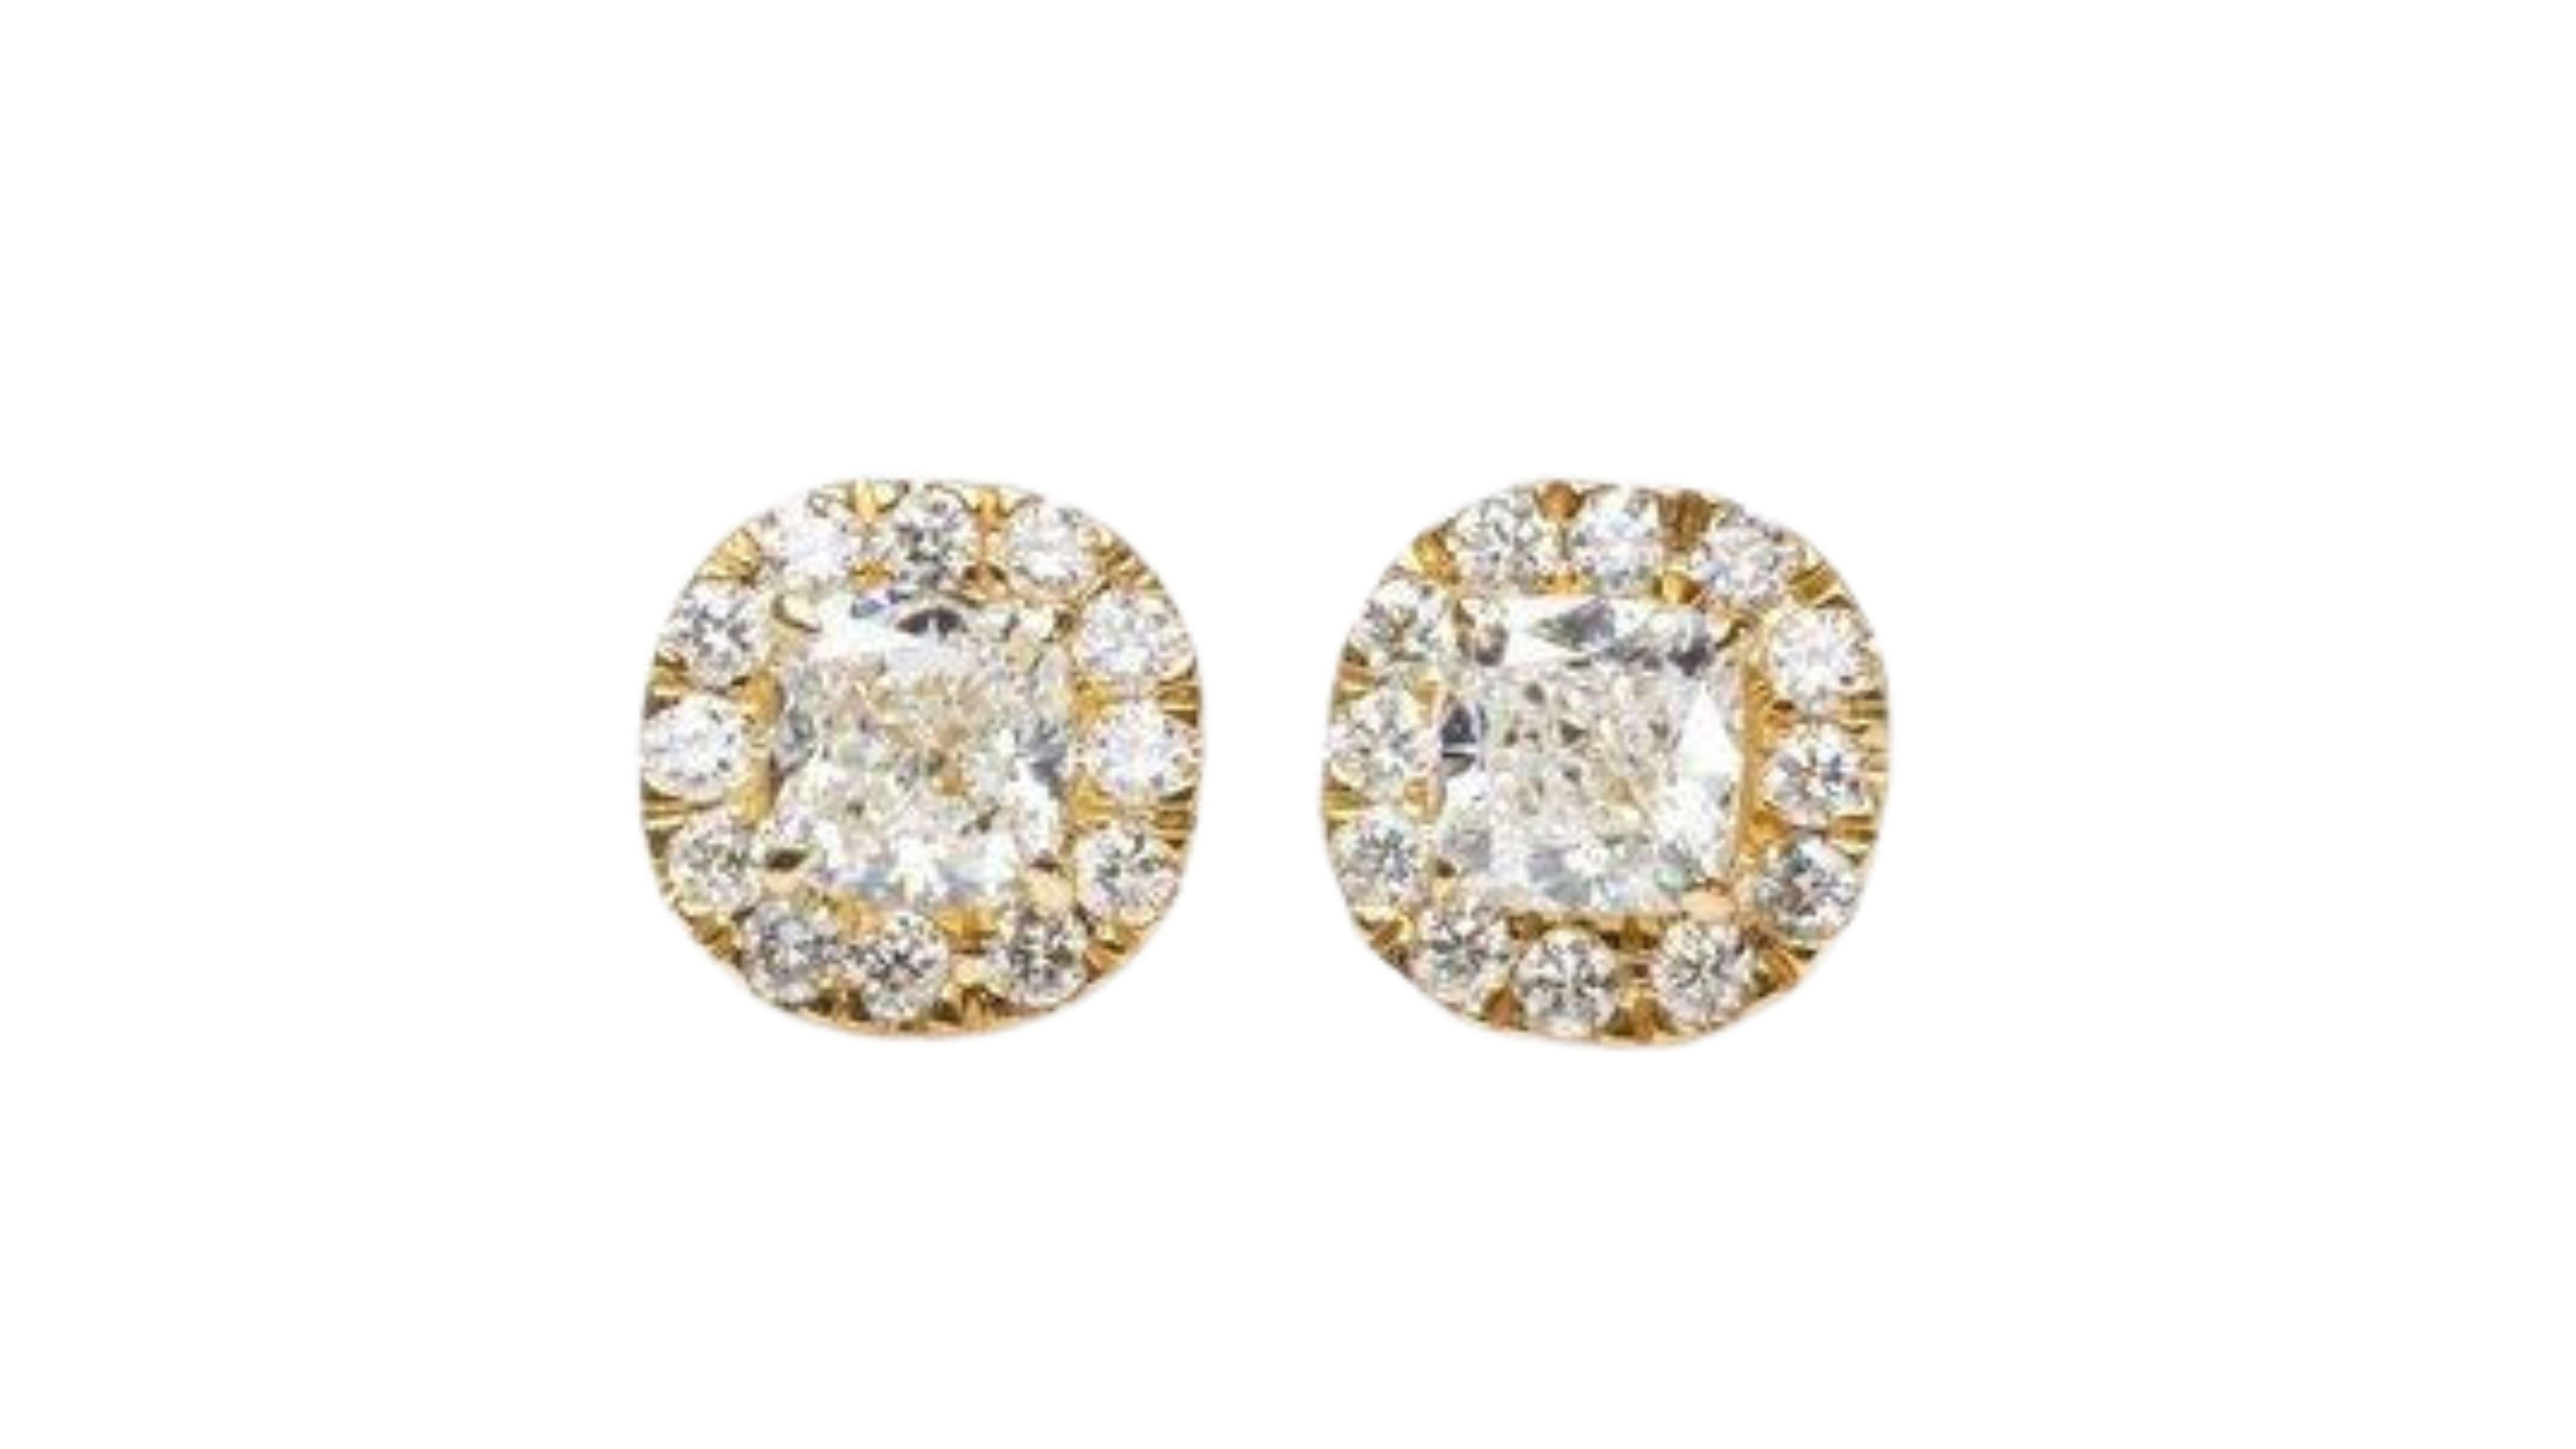 A beautiful pair of classic stud halo earrings with a dazzling pair of 1.01 carat cushion shape natural diamond in G VVS1 and 0.26 carat of round brilliant diamonds to complement the elegance of the jewelry. The jewelry is made of 18K yellow gold